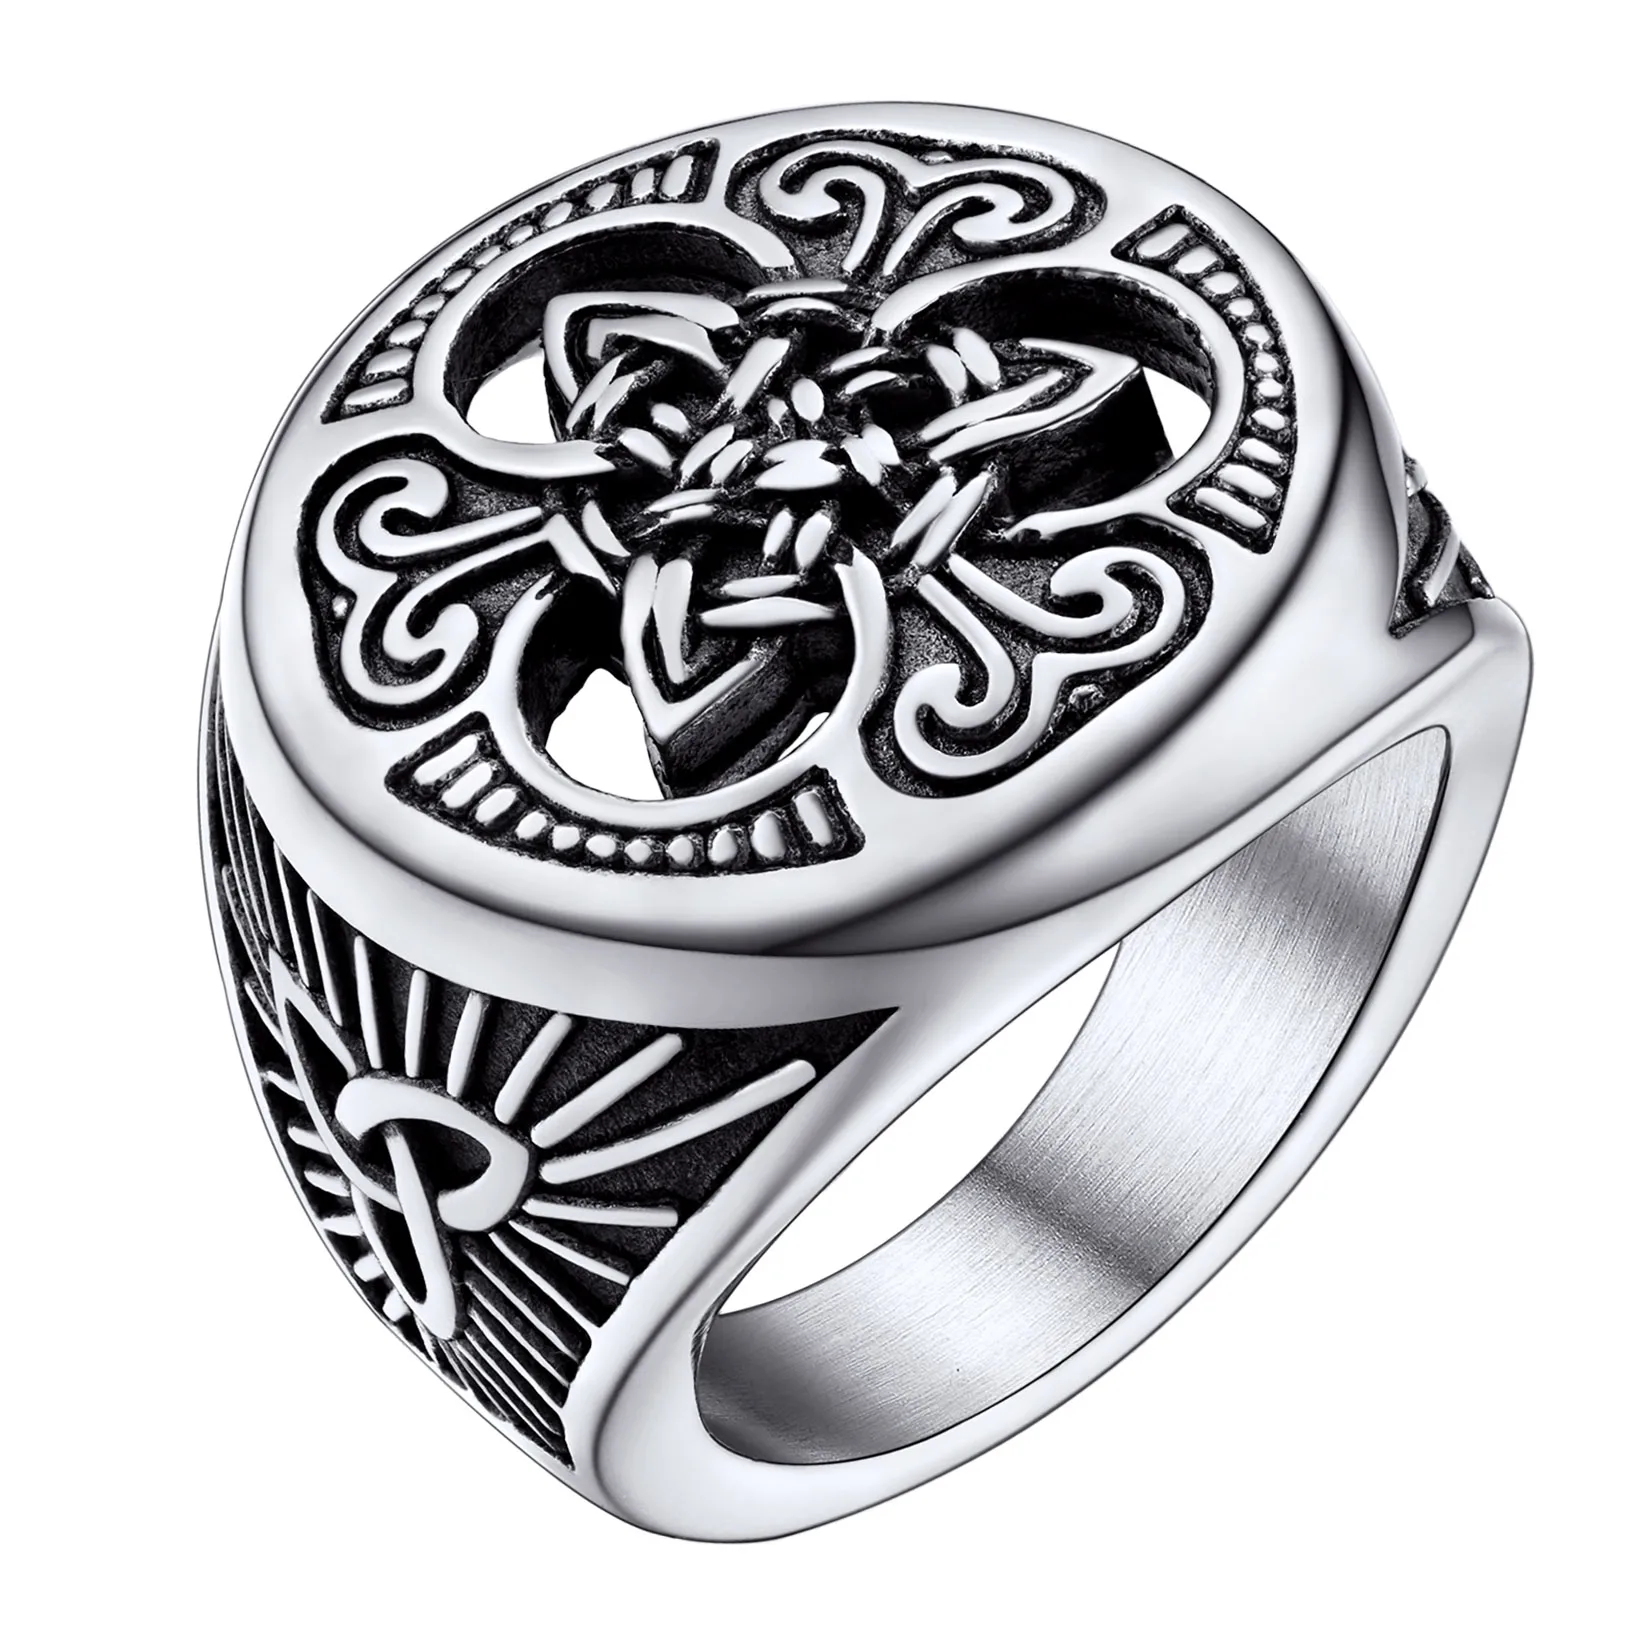 U7 Celtic Ring Retro Celtic Jewelry Stainless Steel/Black/18K Gold Plated Triquetra Knot Round Signet Rings Wedding Band for Men Women 